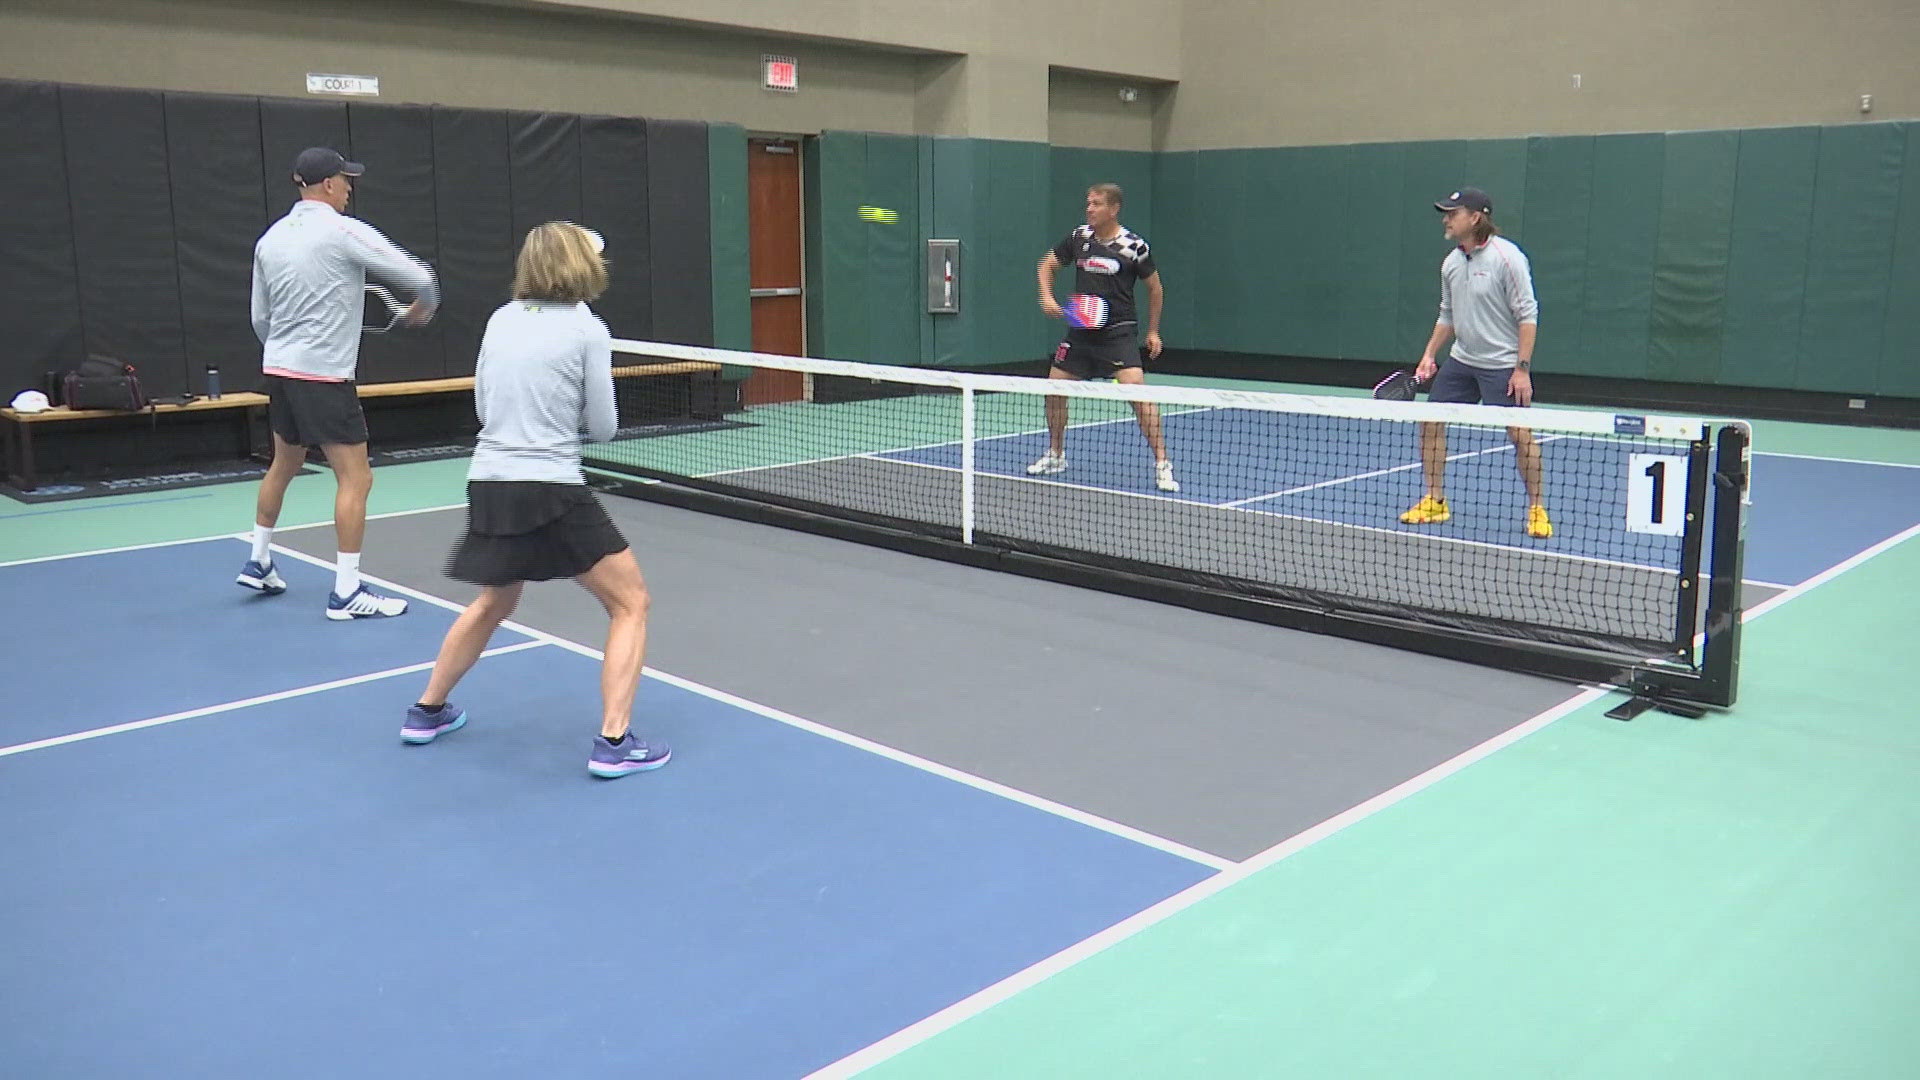 The team is one of 12 in the National Pickleball League, and brought home the first-ever NPL national championship last year.